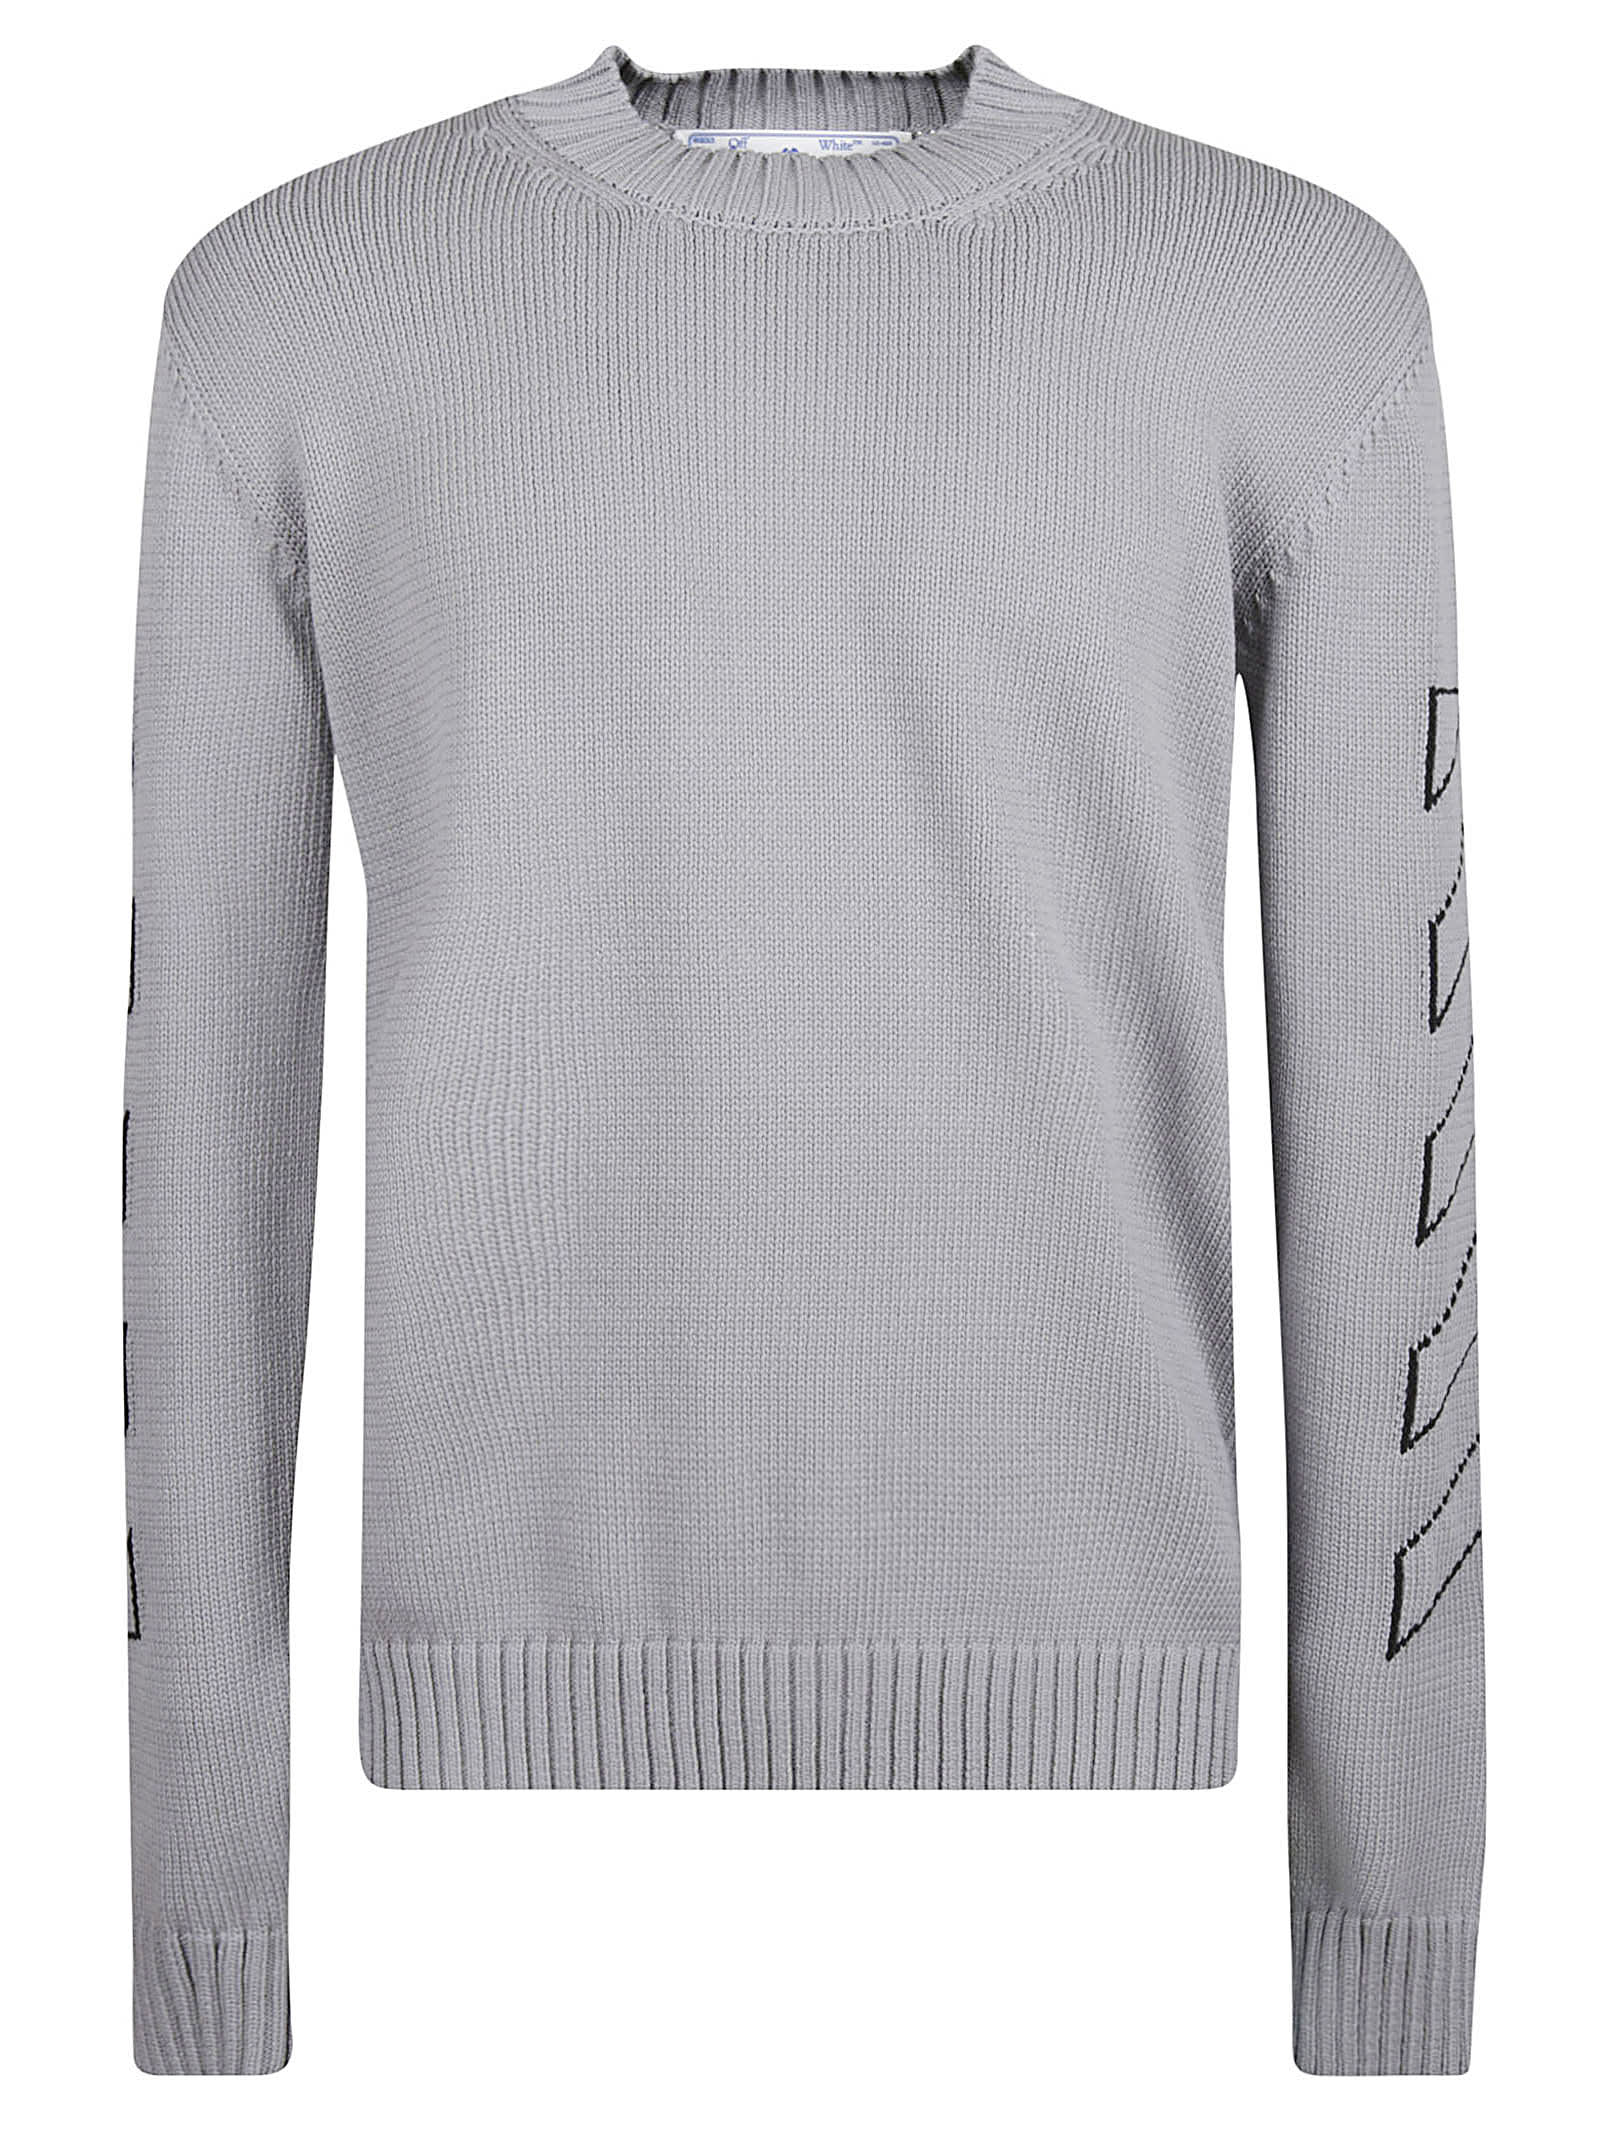 Off-White Diag Outline Knit Crewneck Sweater